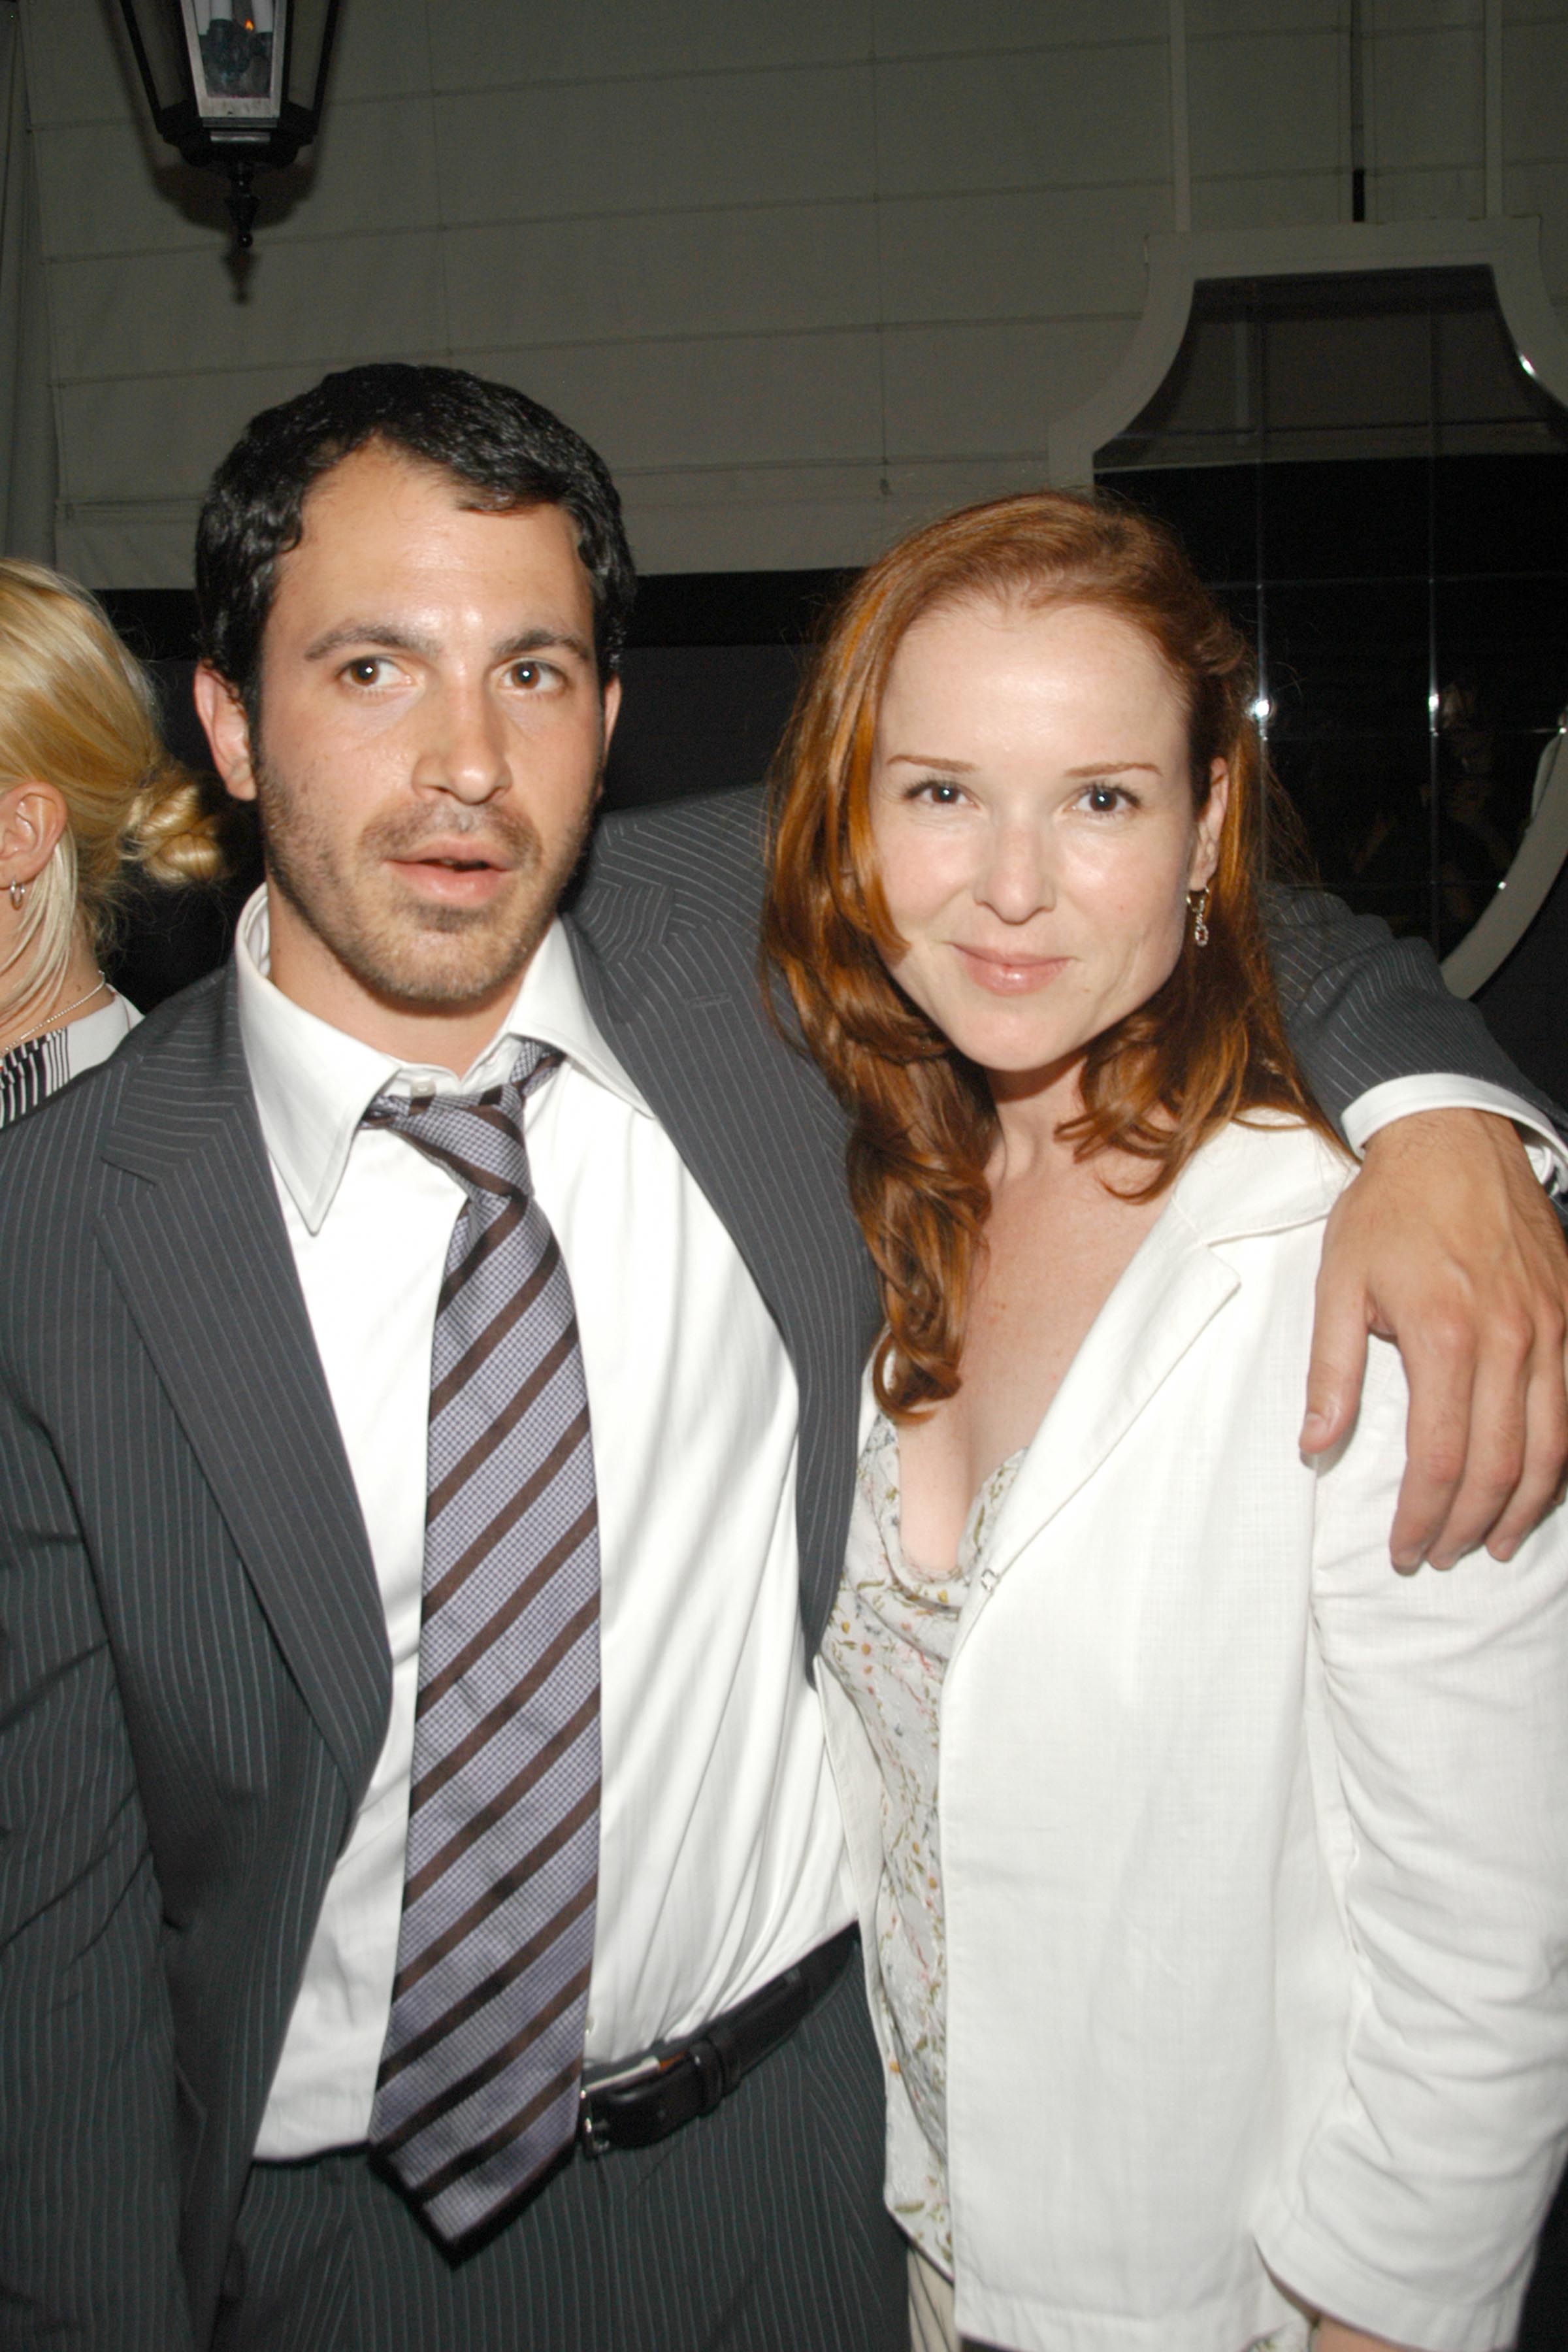 Chris Messina and Jennifer Todd attend Viceroy Celebrates "Ira & Abby" at Viceroy, on June 23, 2006. | Source: Getty Images